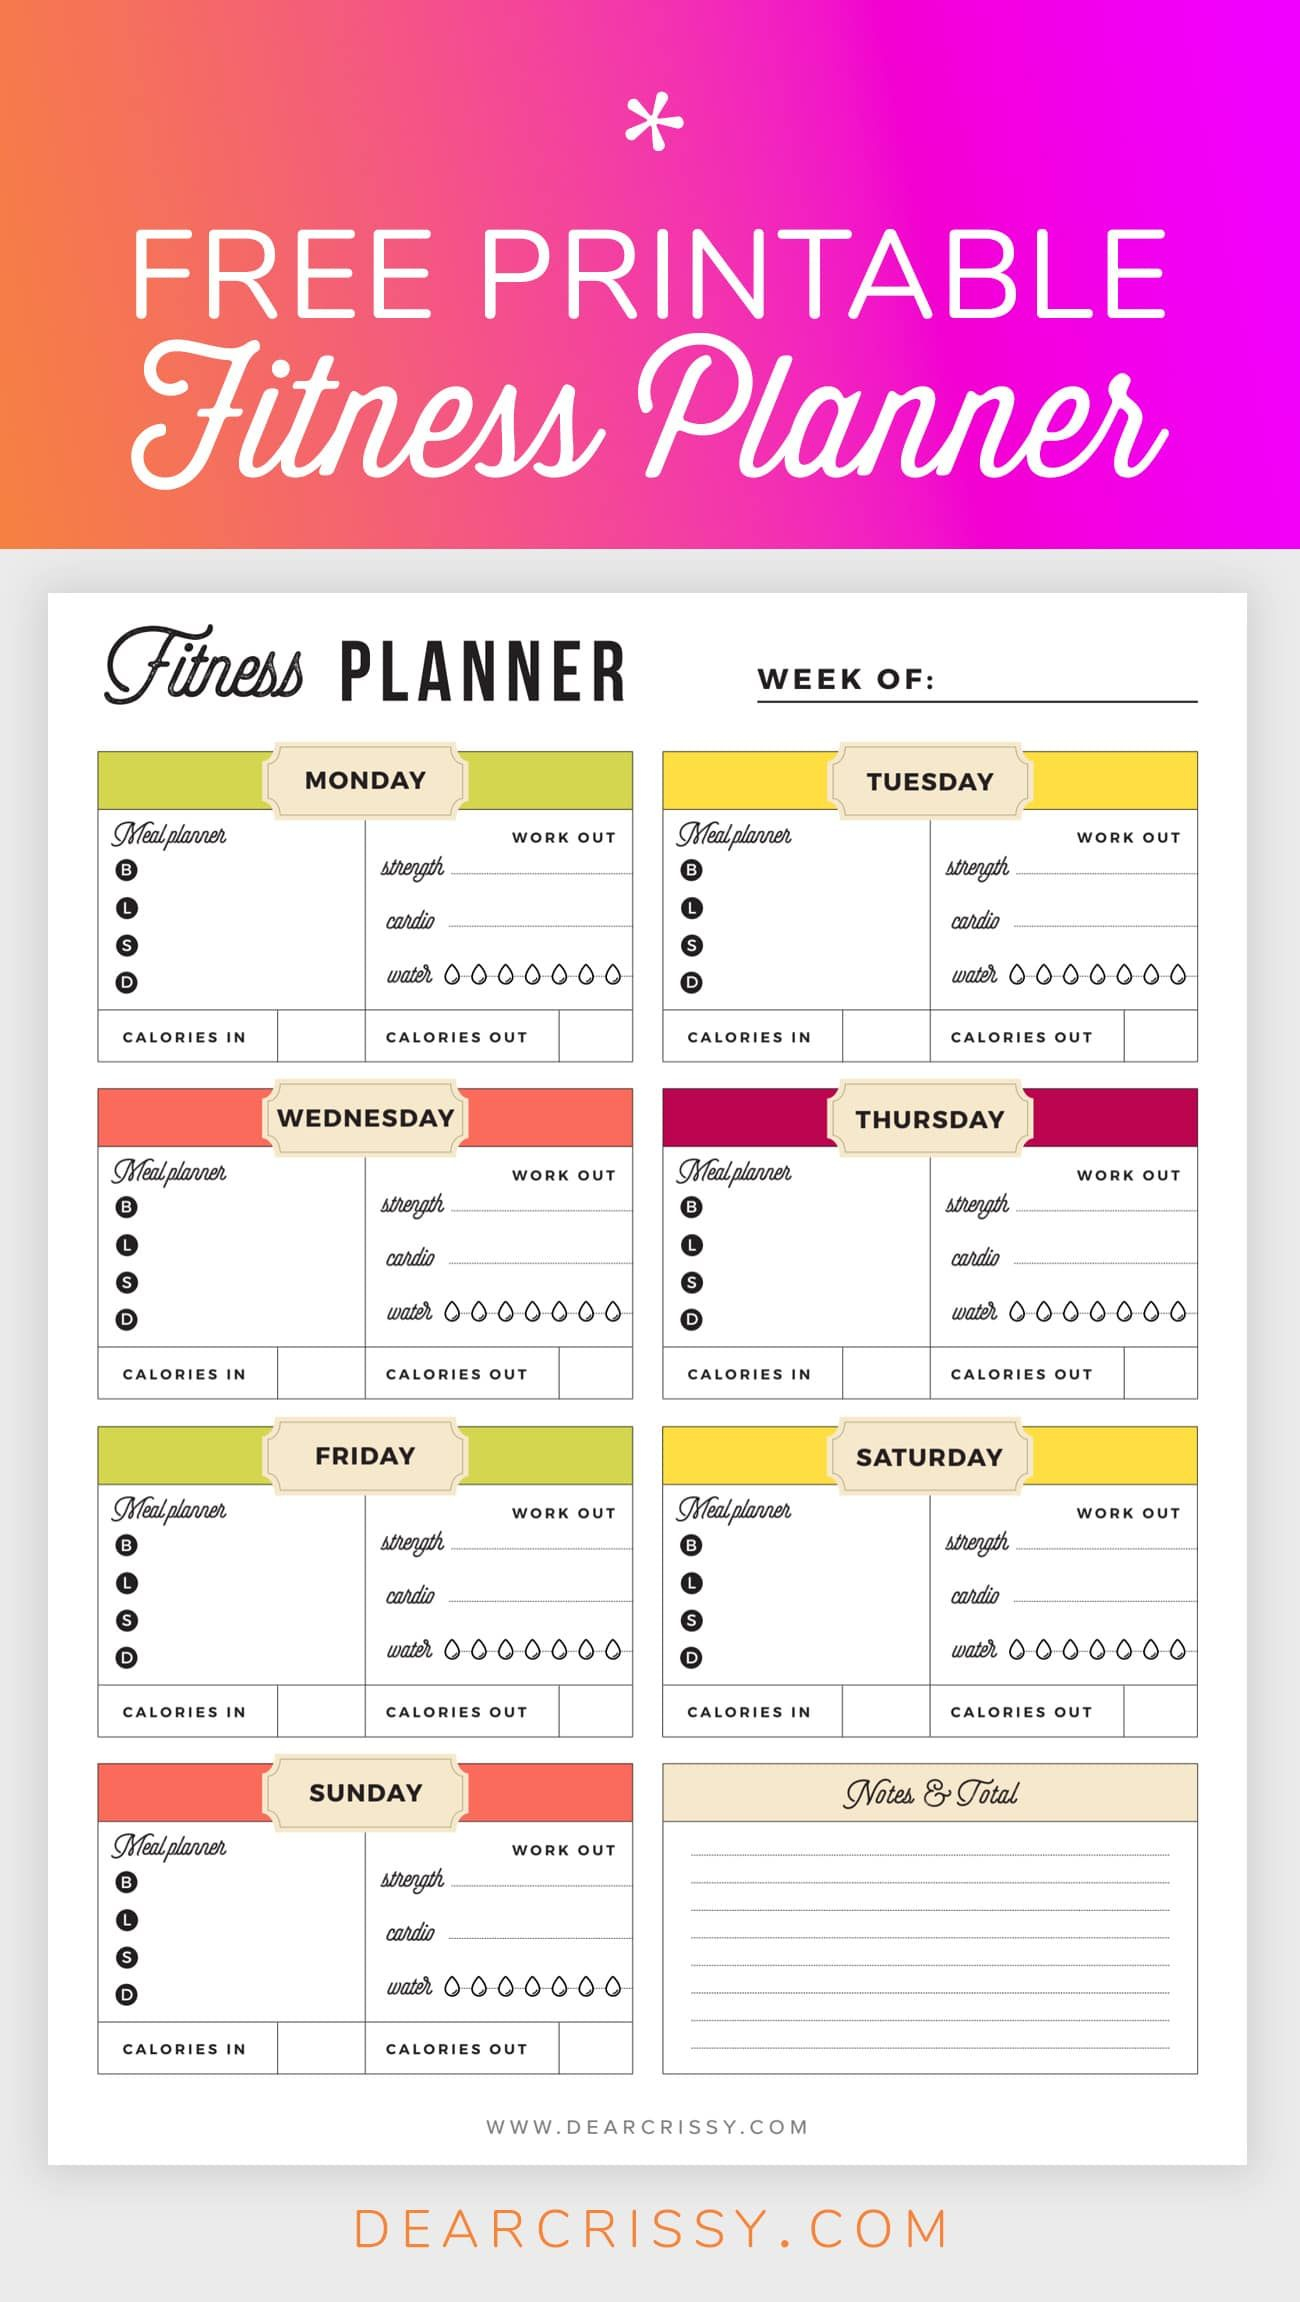 Free Printable Fitness Planner - Meal And Fitness Tracker, Start - Free Printable Fitness Tracker